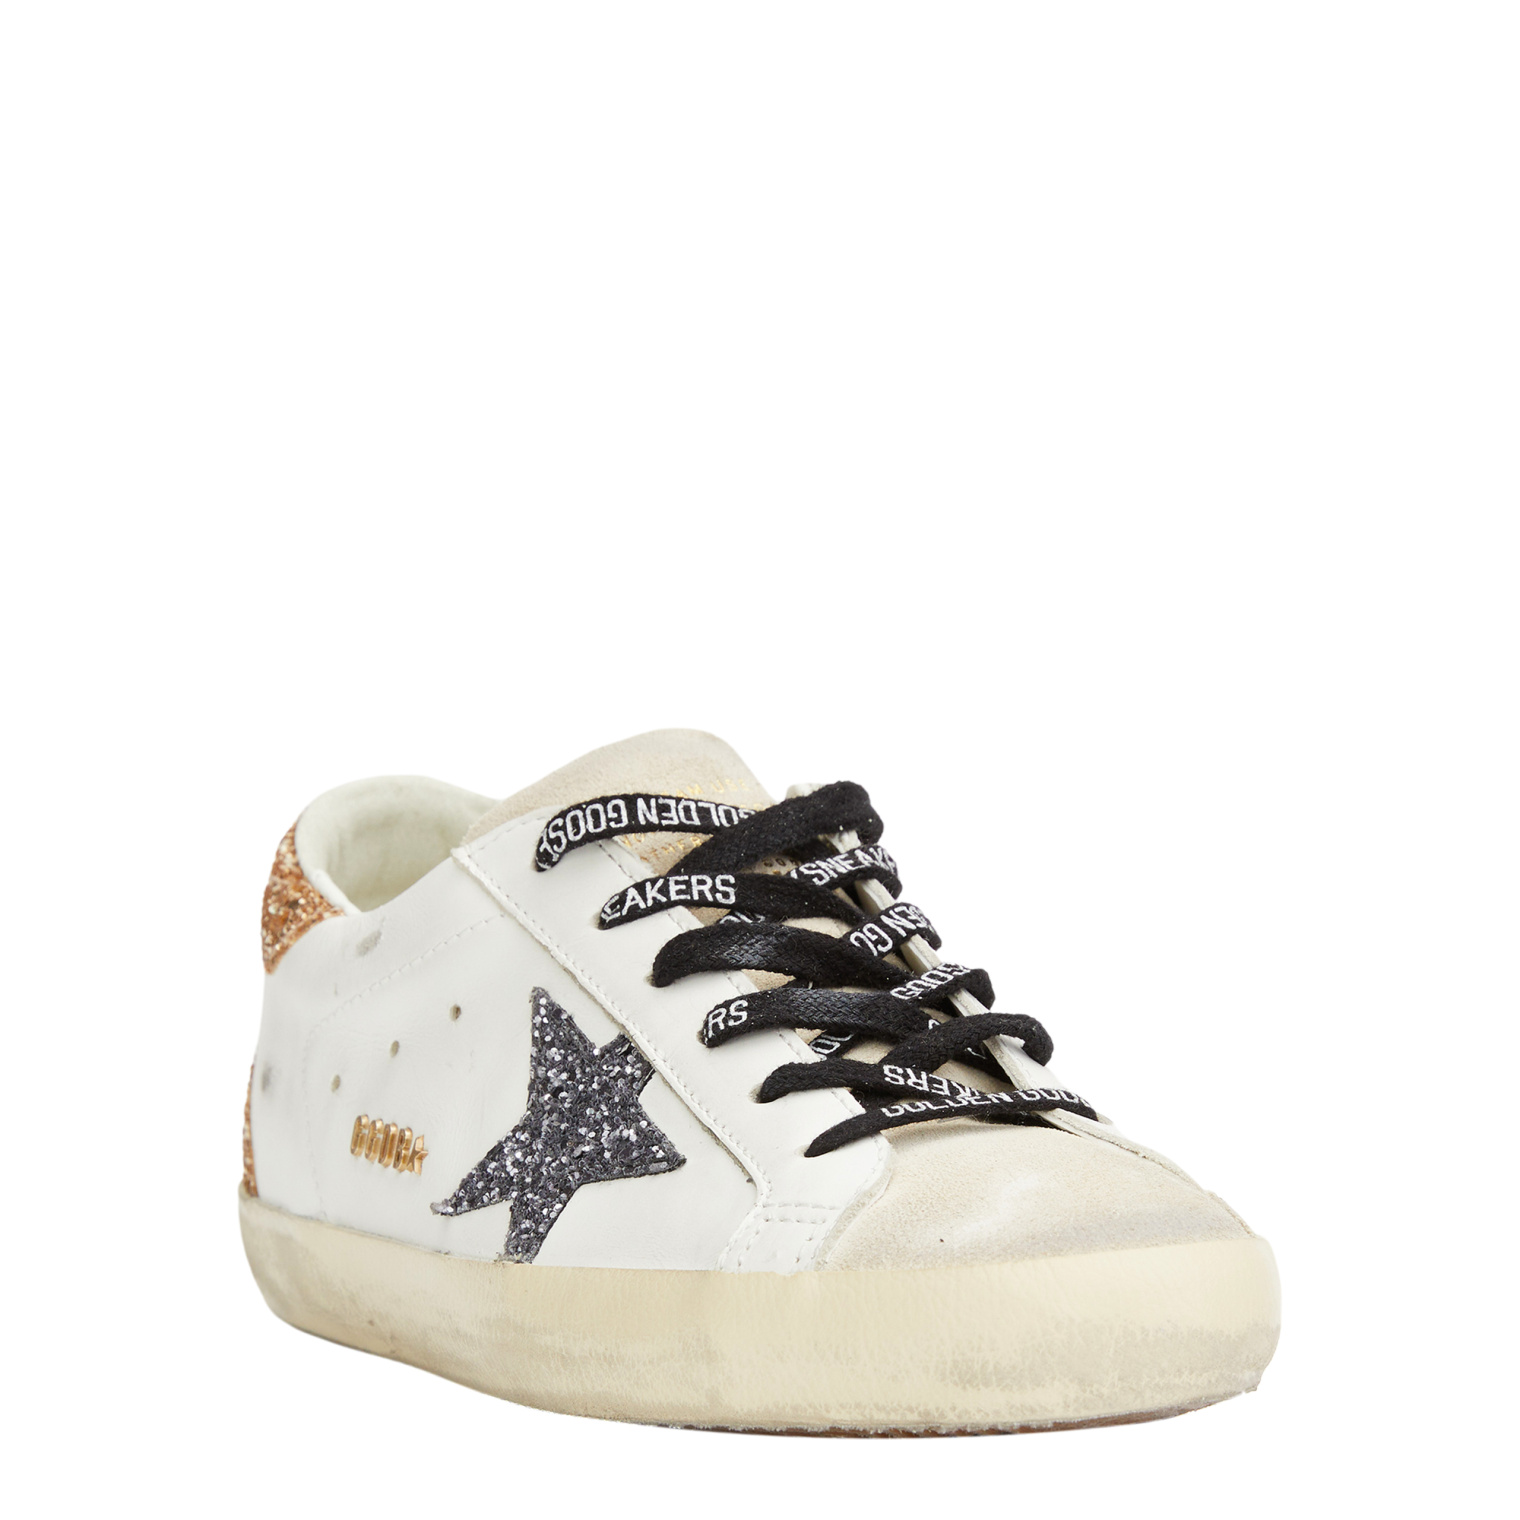 Golden Goose Super Star leather sneakers with glitter star